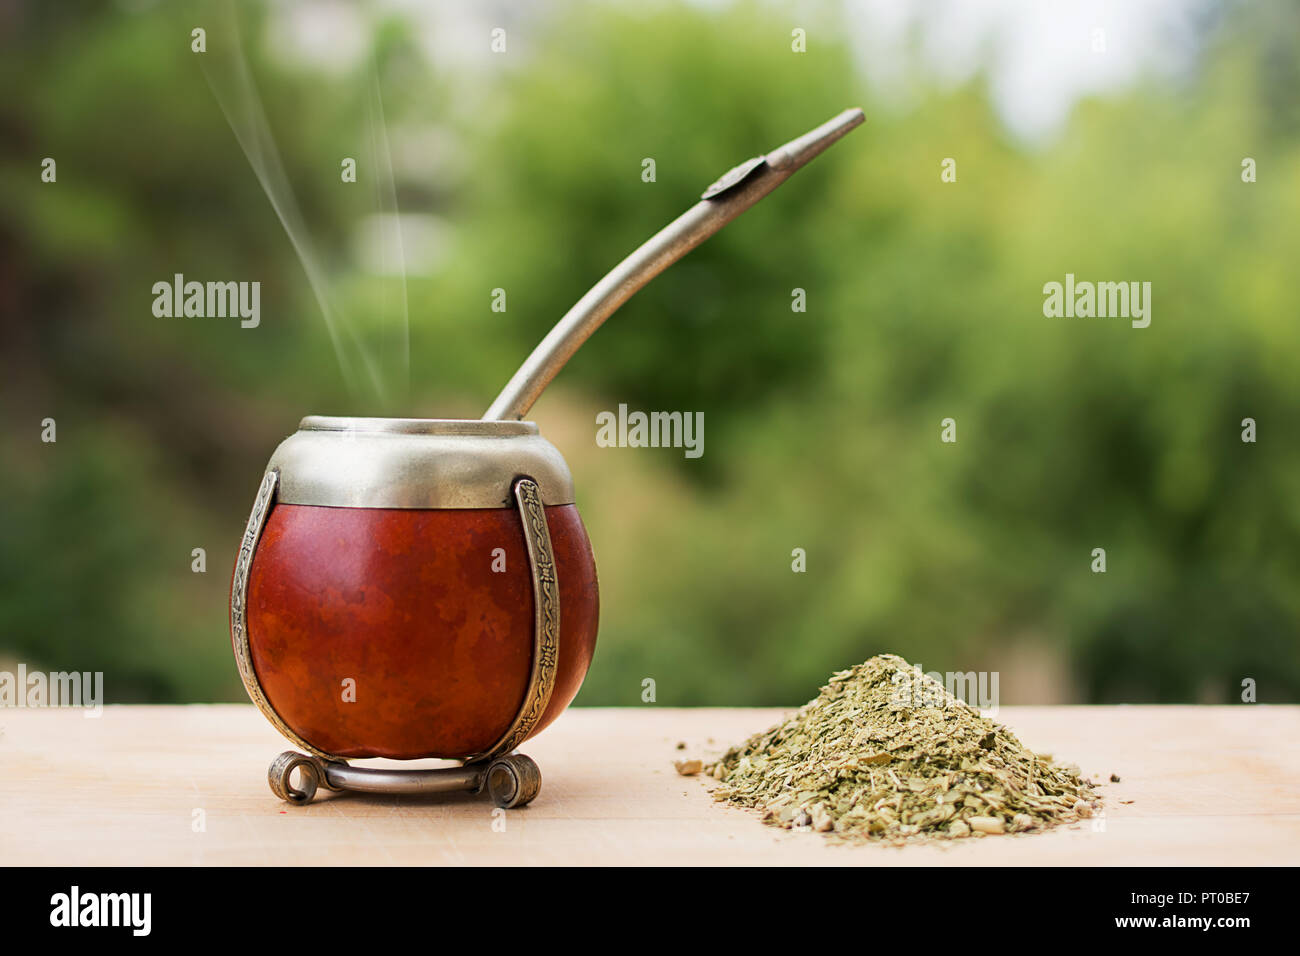 https://c8.alamy.com/comp/PT0BE7/mate-mate-grass-yerba-mate-with-trees-in-the-background-PT0BE7.jpg